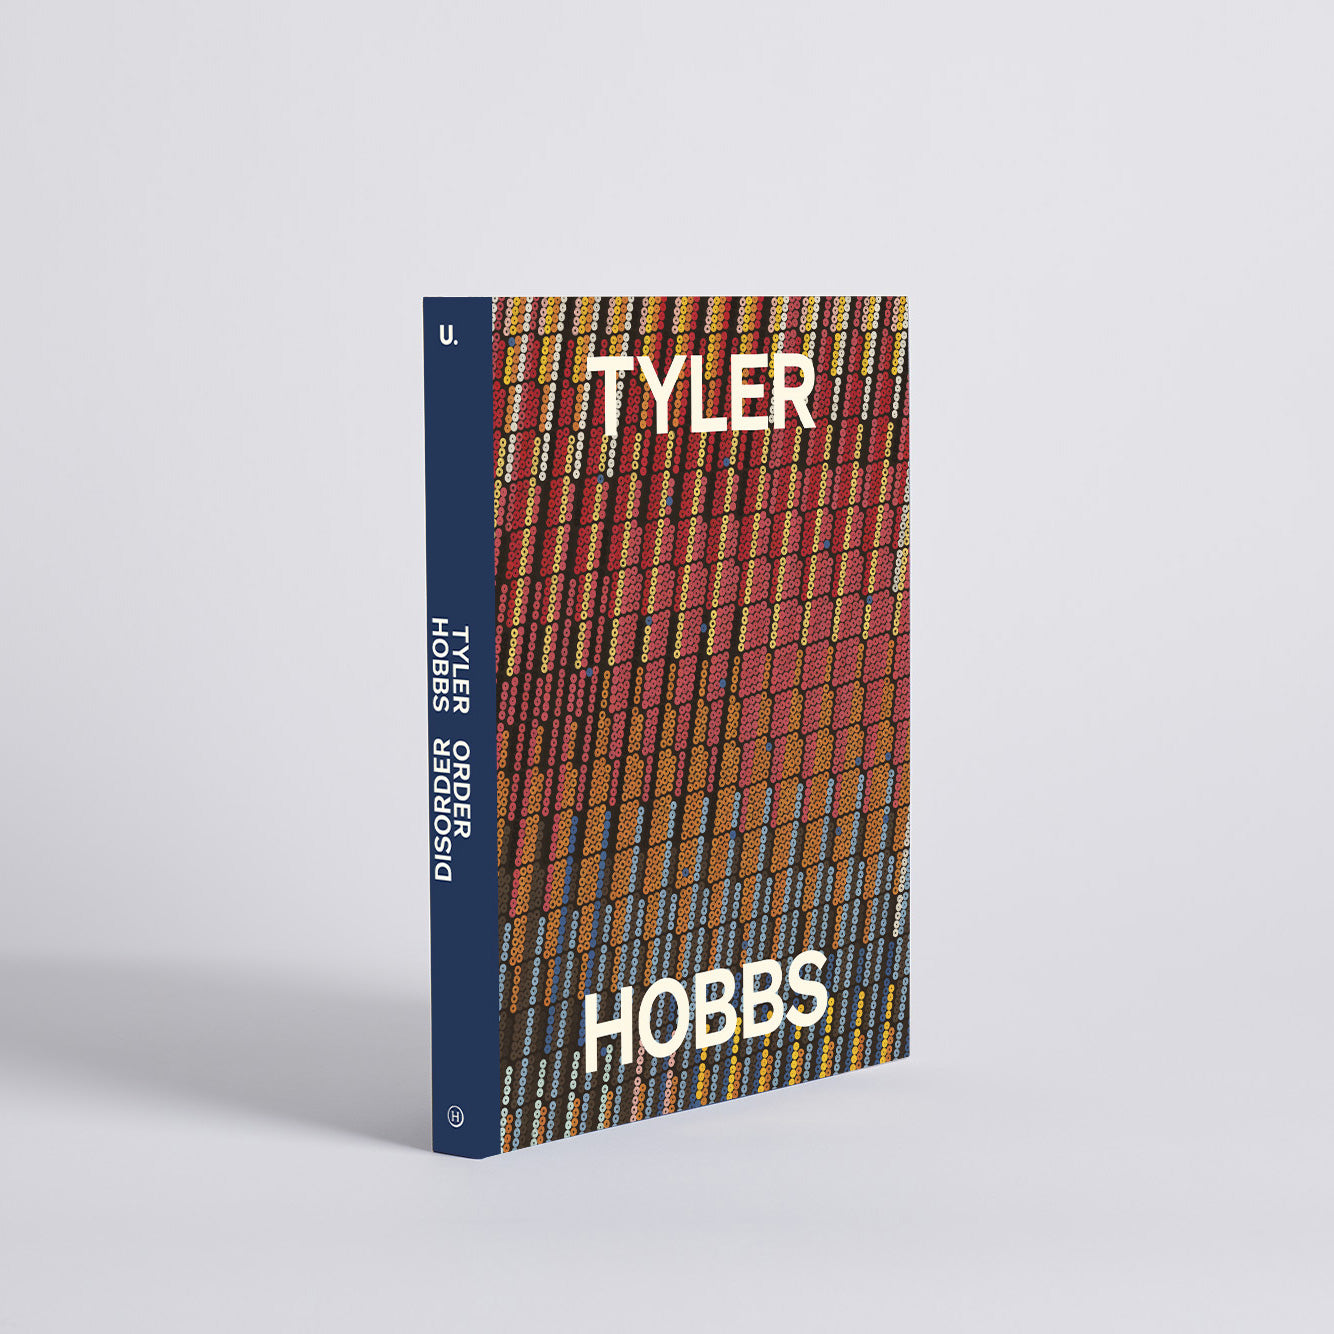 Order/Disorder (Limited Edition) - Tyler Hobbs